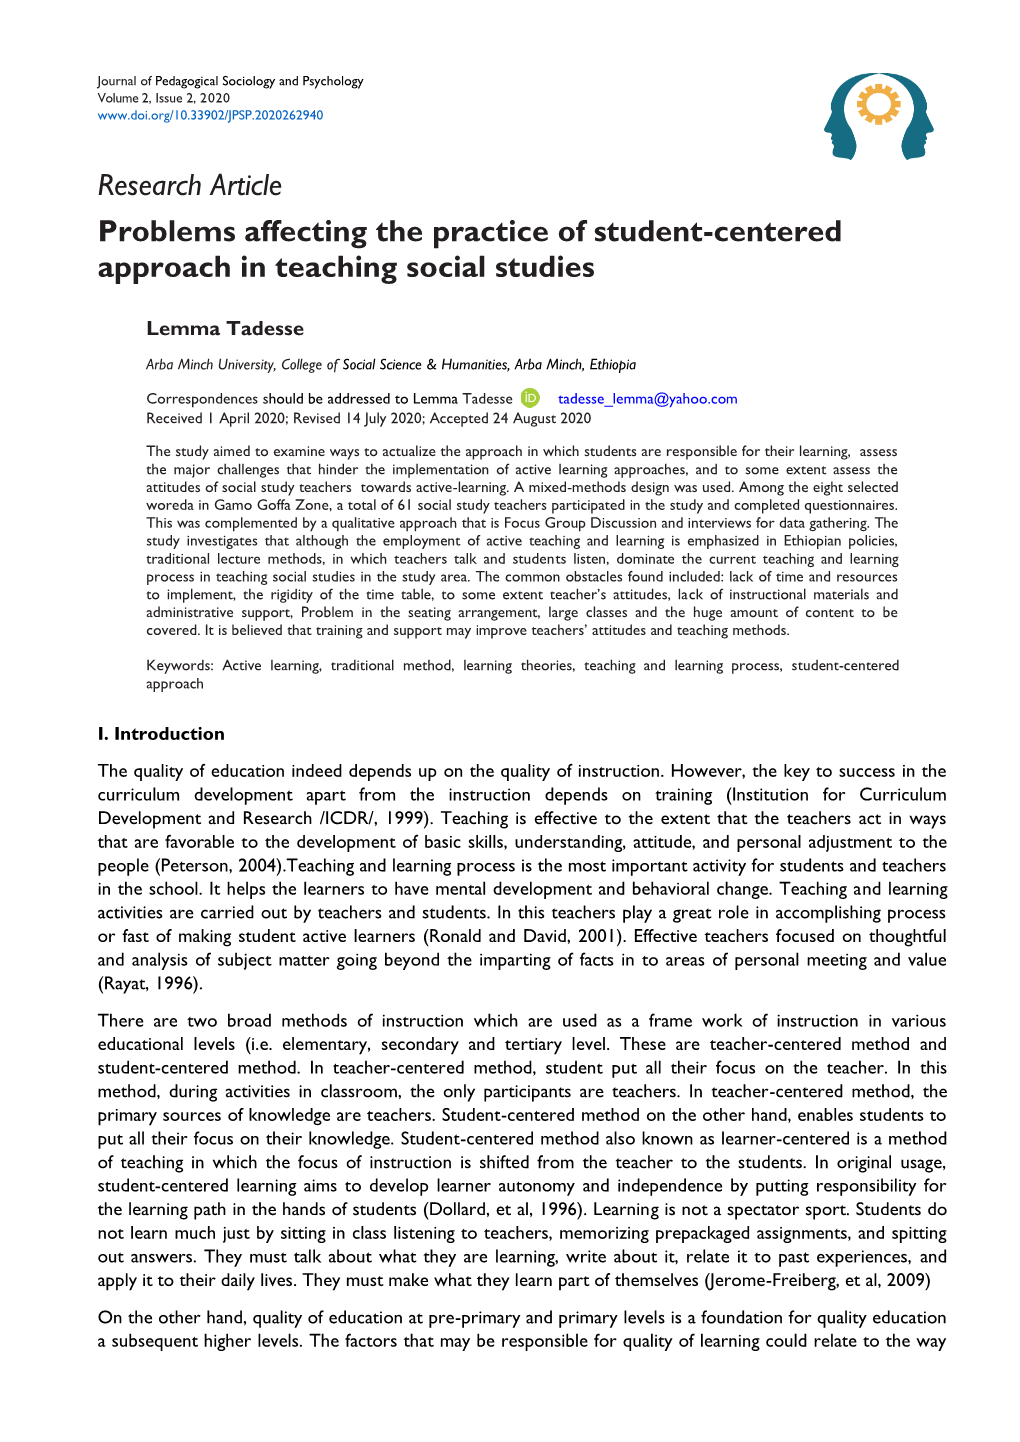 Research Article Problems Affecting the Practice of Student-Centered Approach in Teaching Social Studies